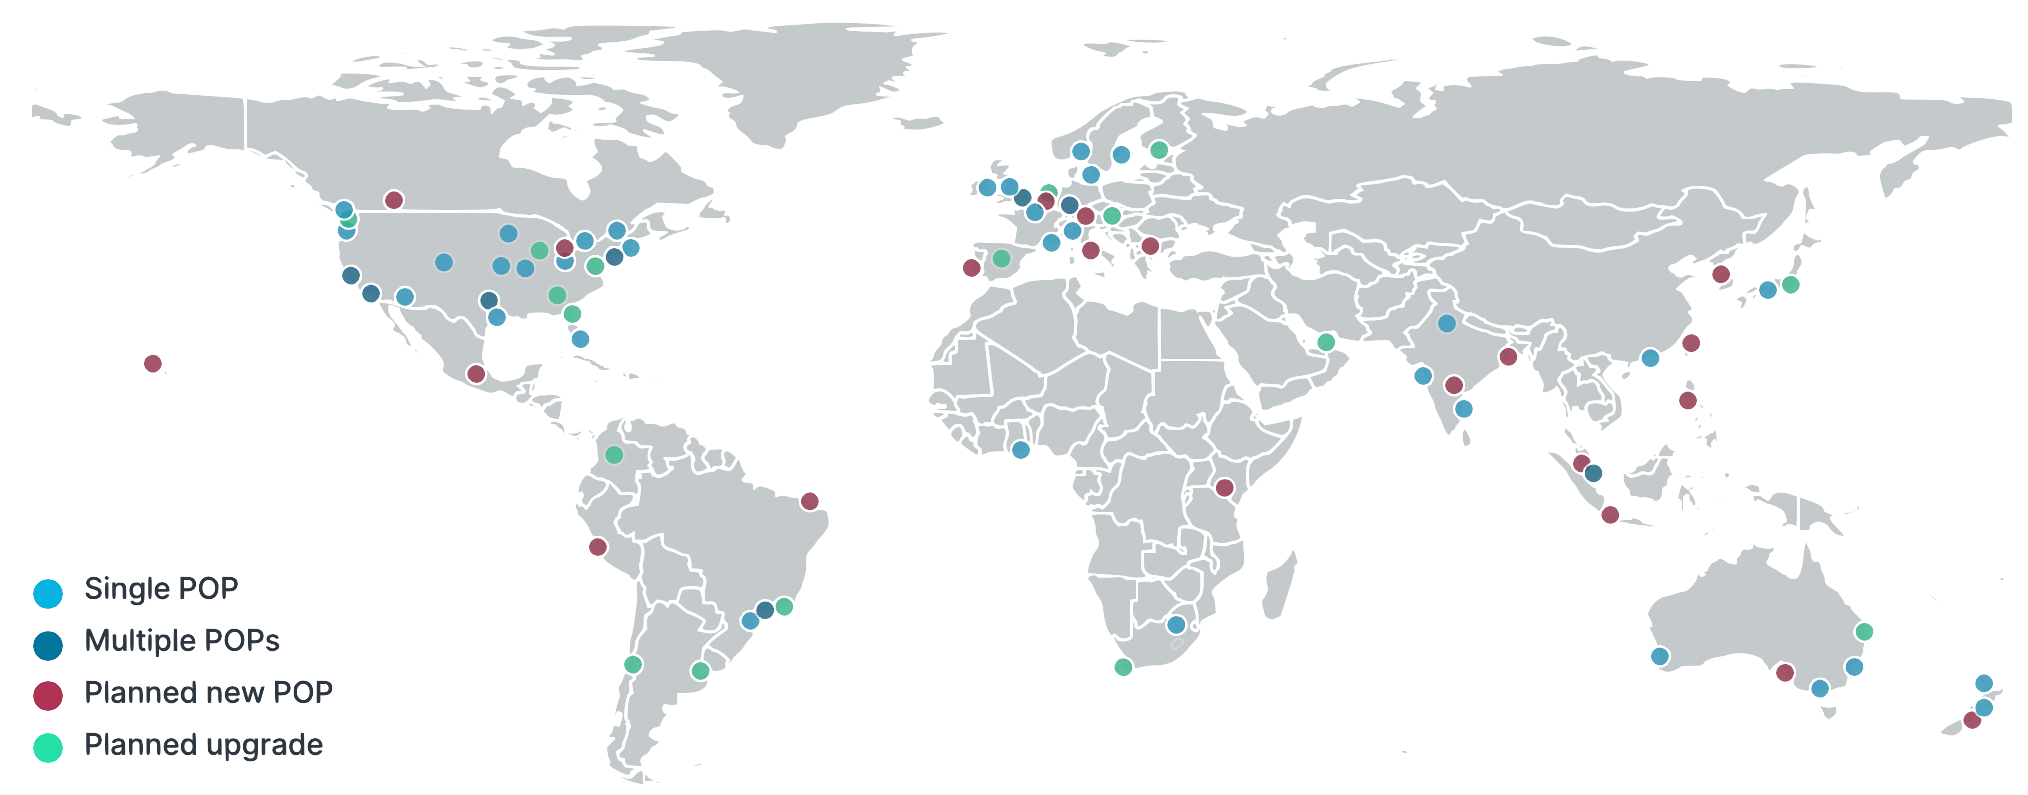 Point of Presence servers are located all over the world